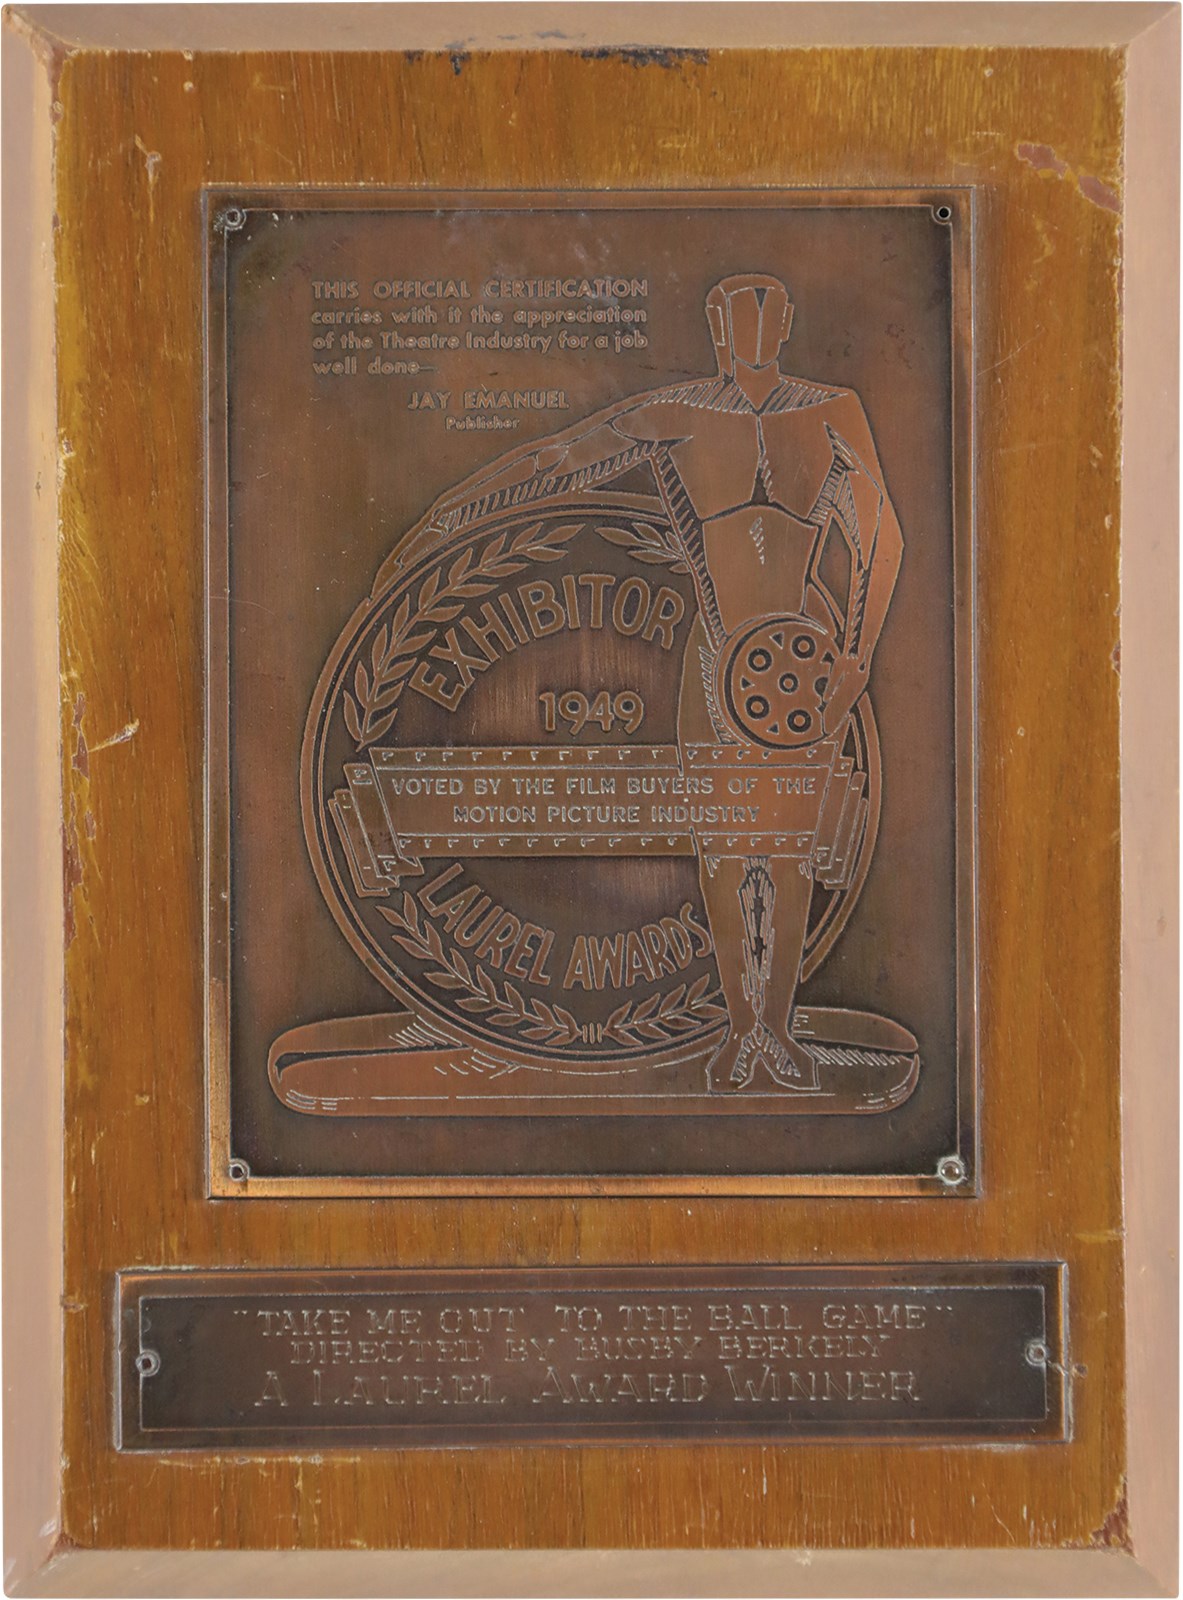 Baseball Awards - 1949 Laurel Award Winner "Take Me Out to the Ball Game" Plaque